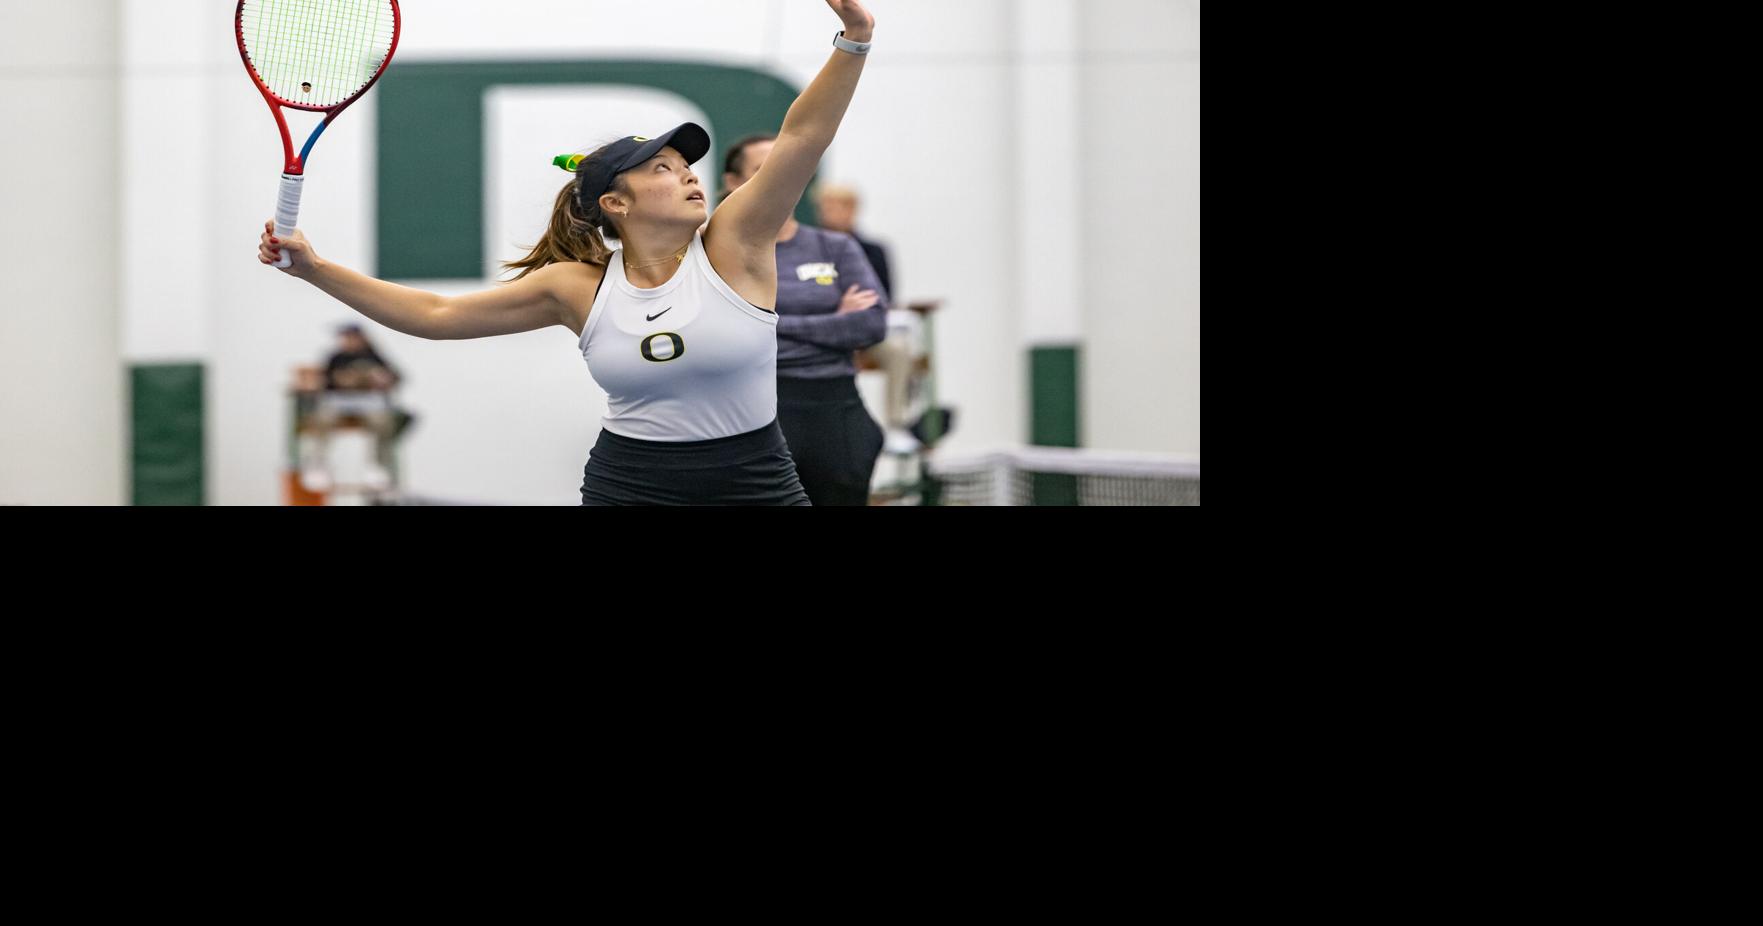 Oregon women’s tennis players’ summer plans are in full swing | Sports